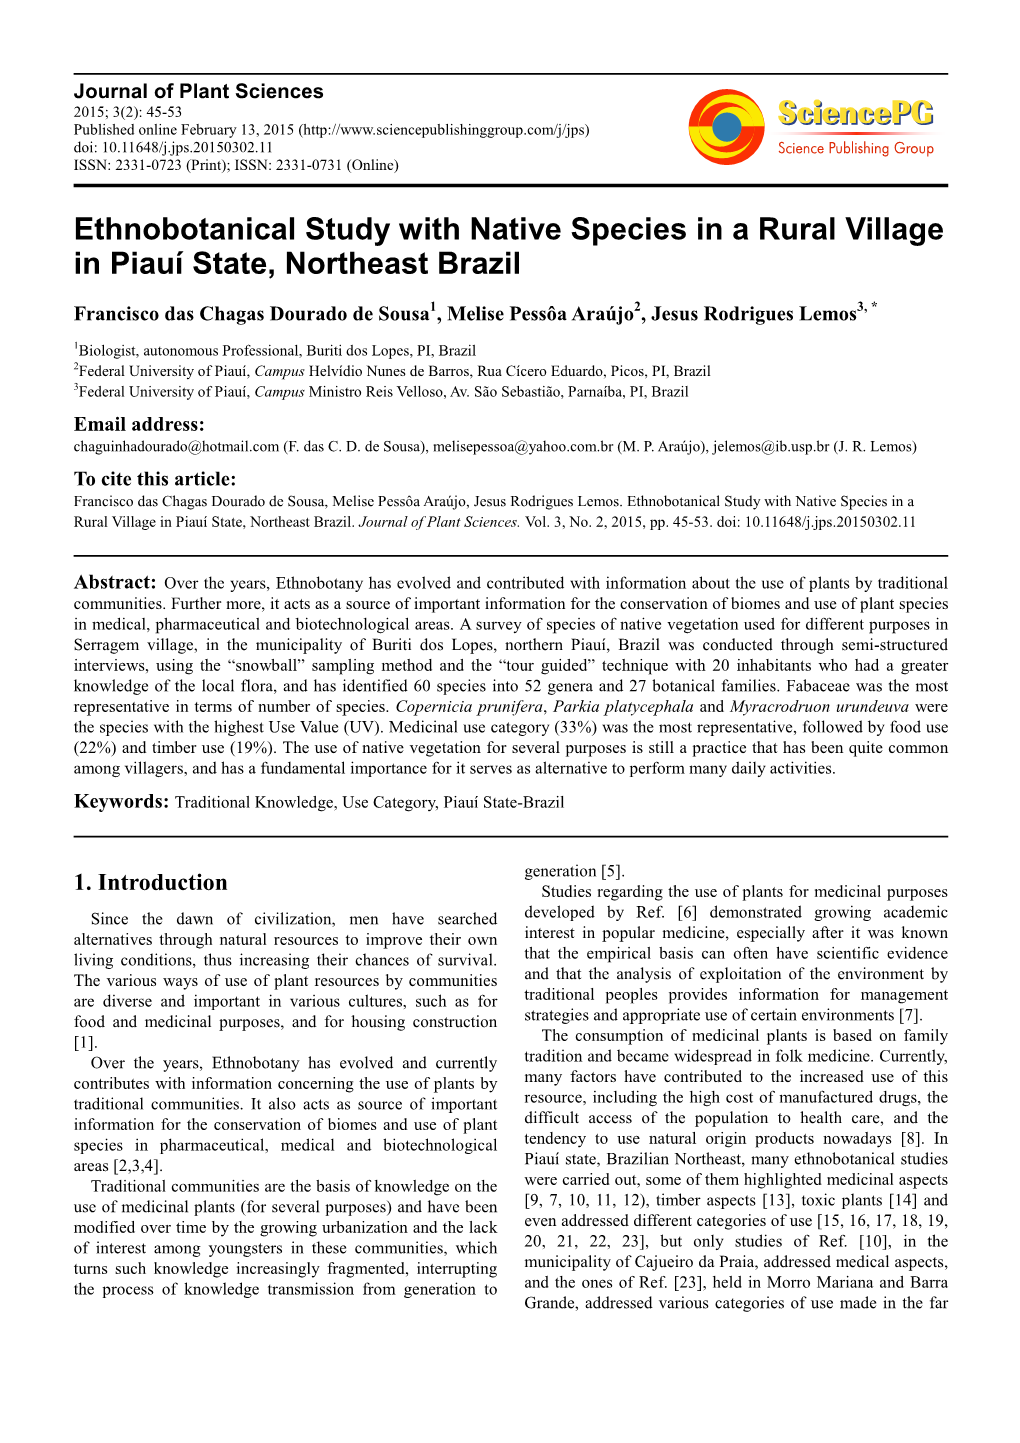 Ethnobotanical Study with Native Species in a Rural Village in Piauí State, Northeast Brazil